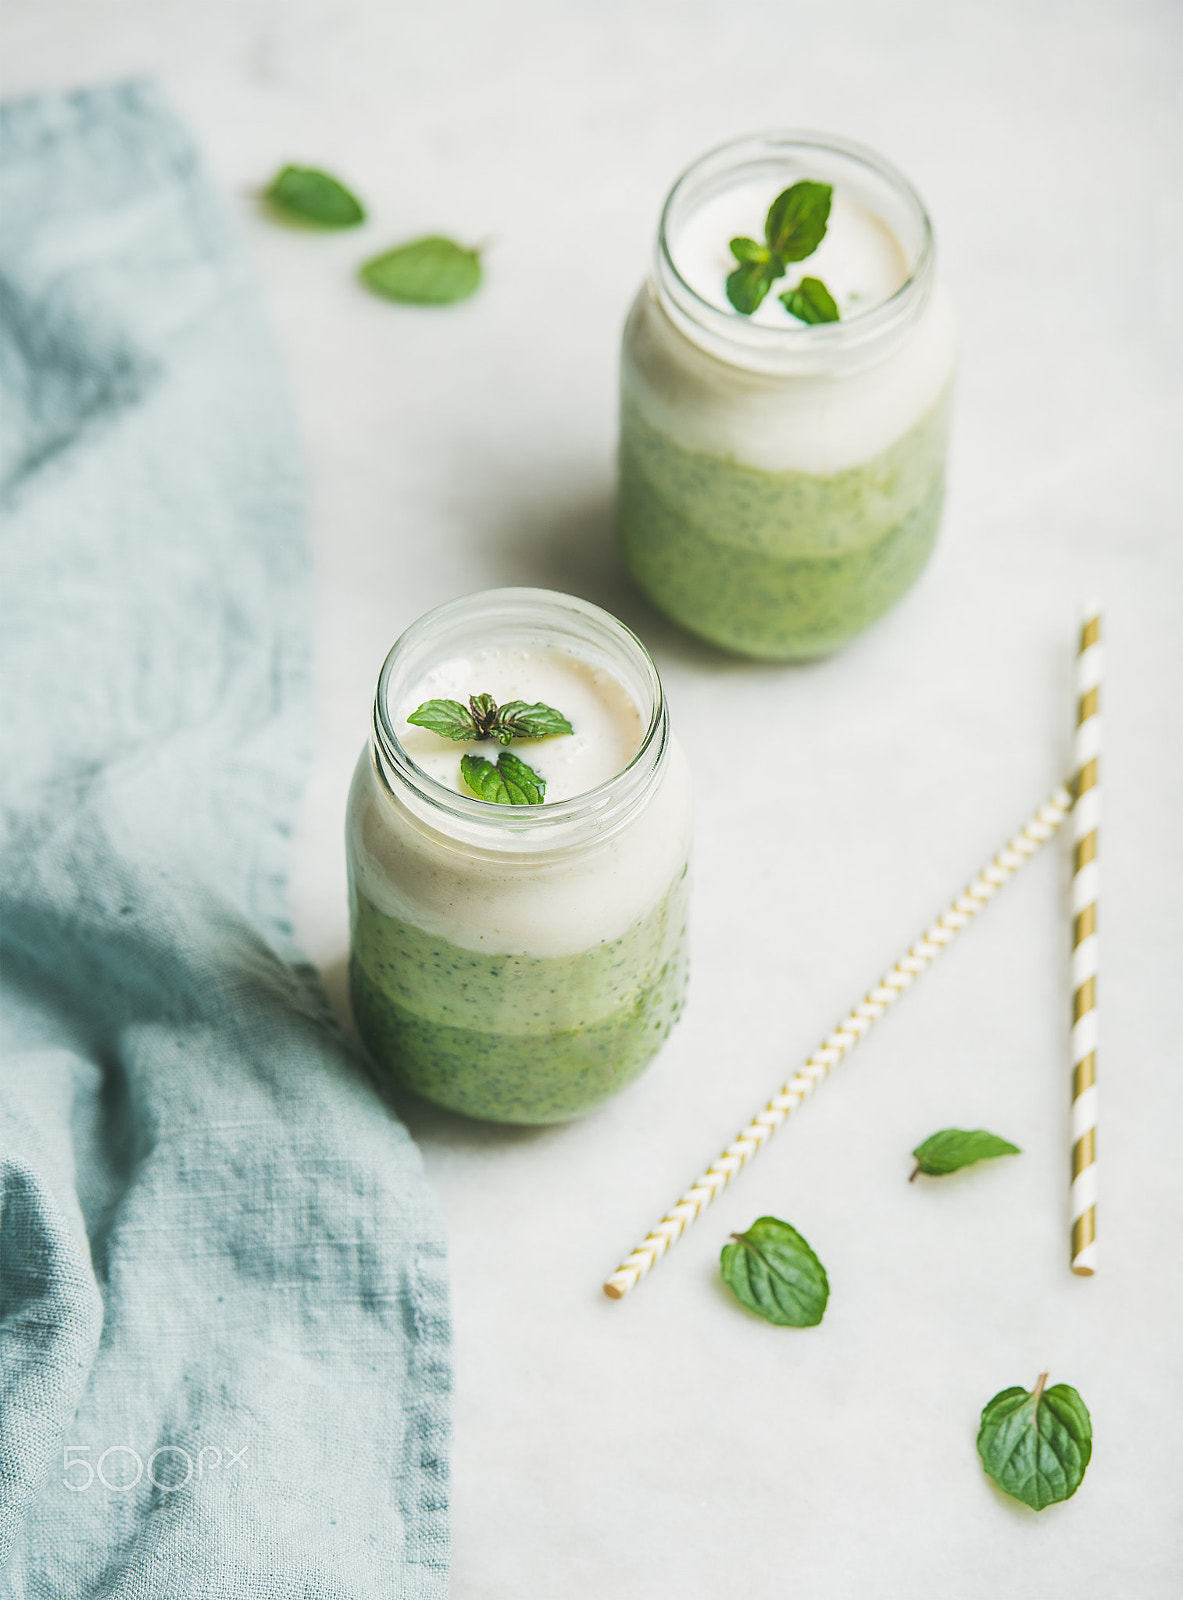 Nikon D610 sample photo. Ombre layered green smoothies with mint in glass jars photography